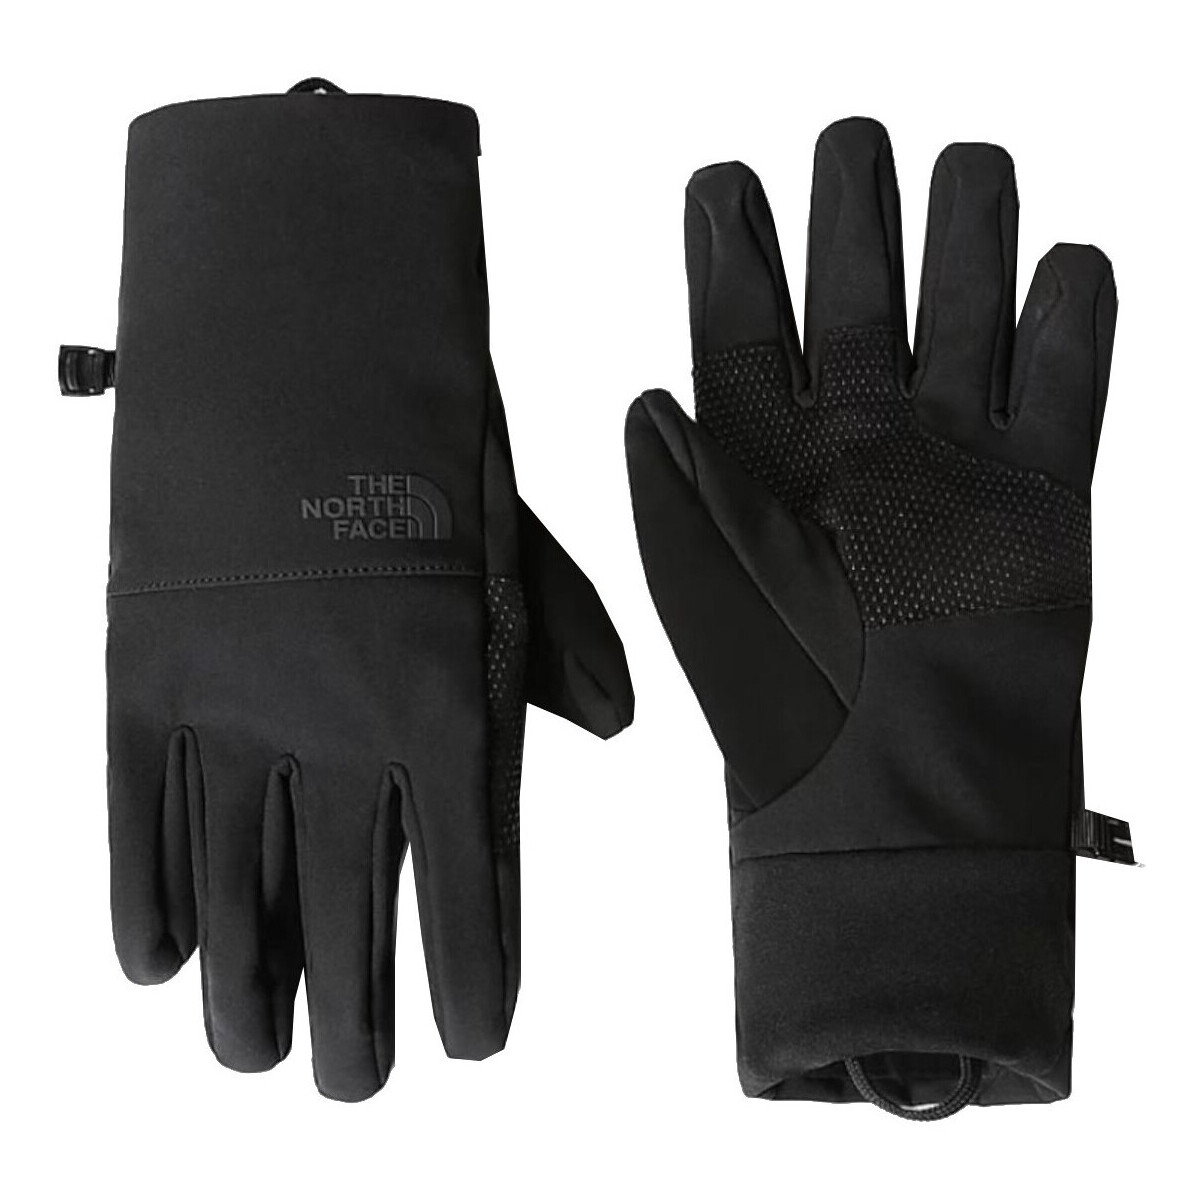 Accesorios textil Guantes The North Face NF0A7RHE Negro